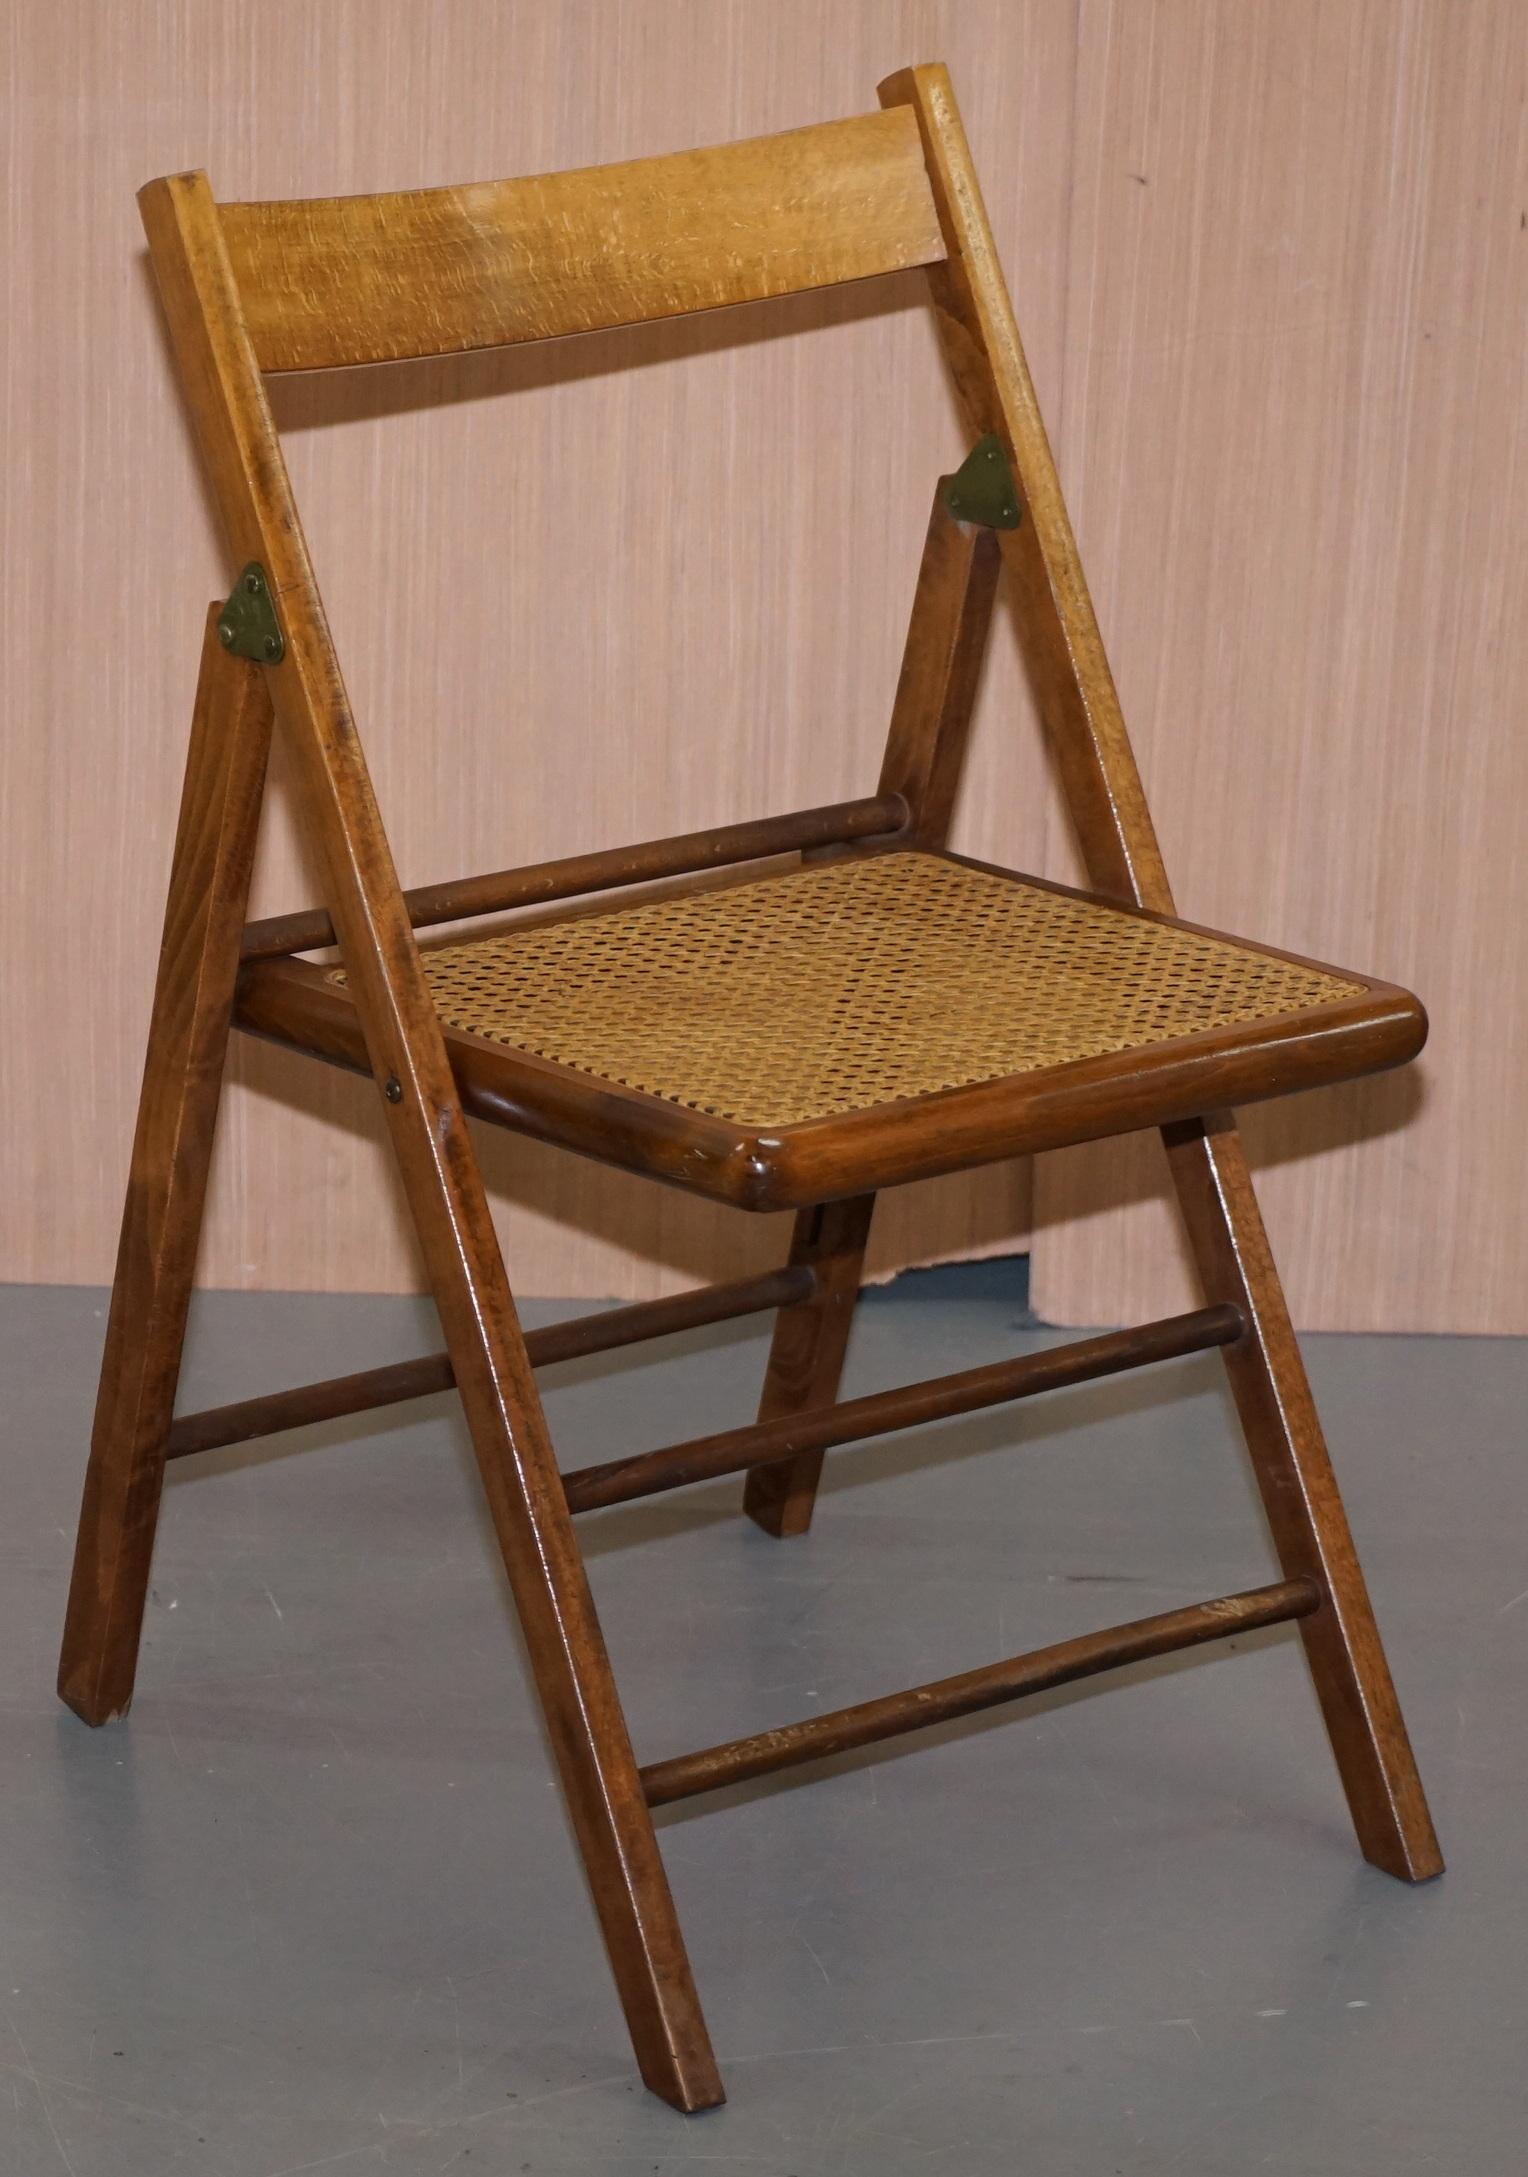 We are delighted to offer for sale this stunning set of four vintage Military campaign folding chairs in oak with brass fittings

A very utilitarian set of chairs, they fold down to be very small as below, these can stored with ease inside most